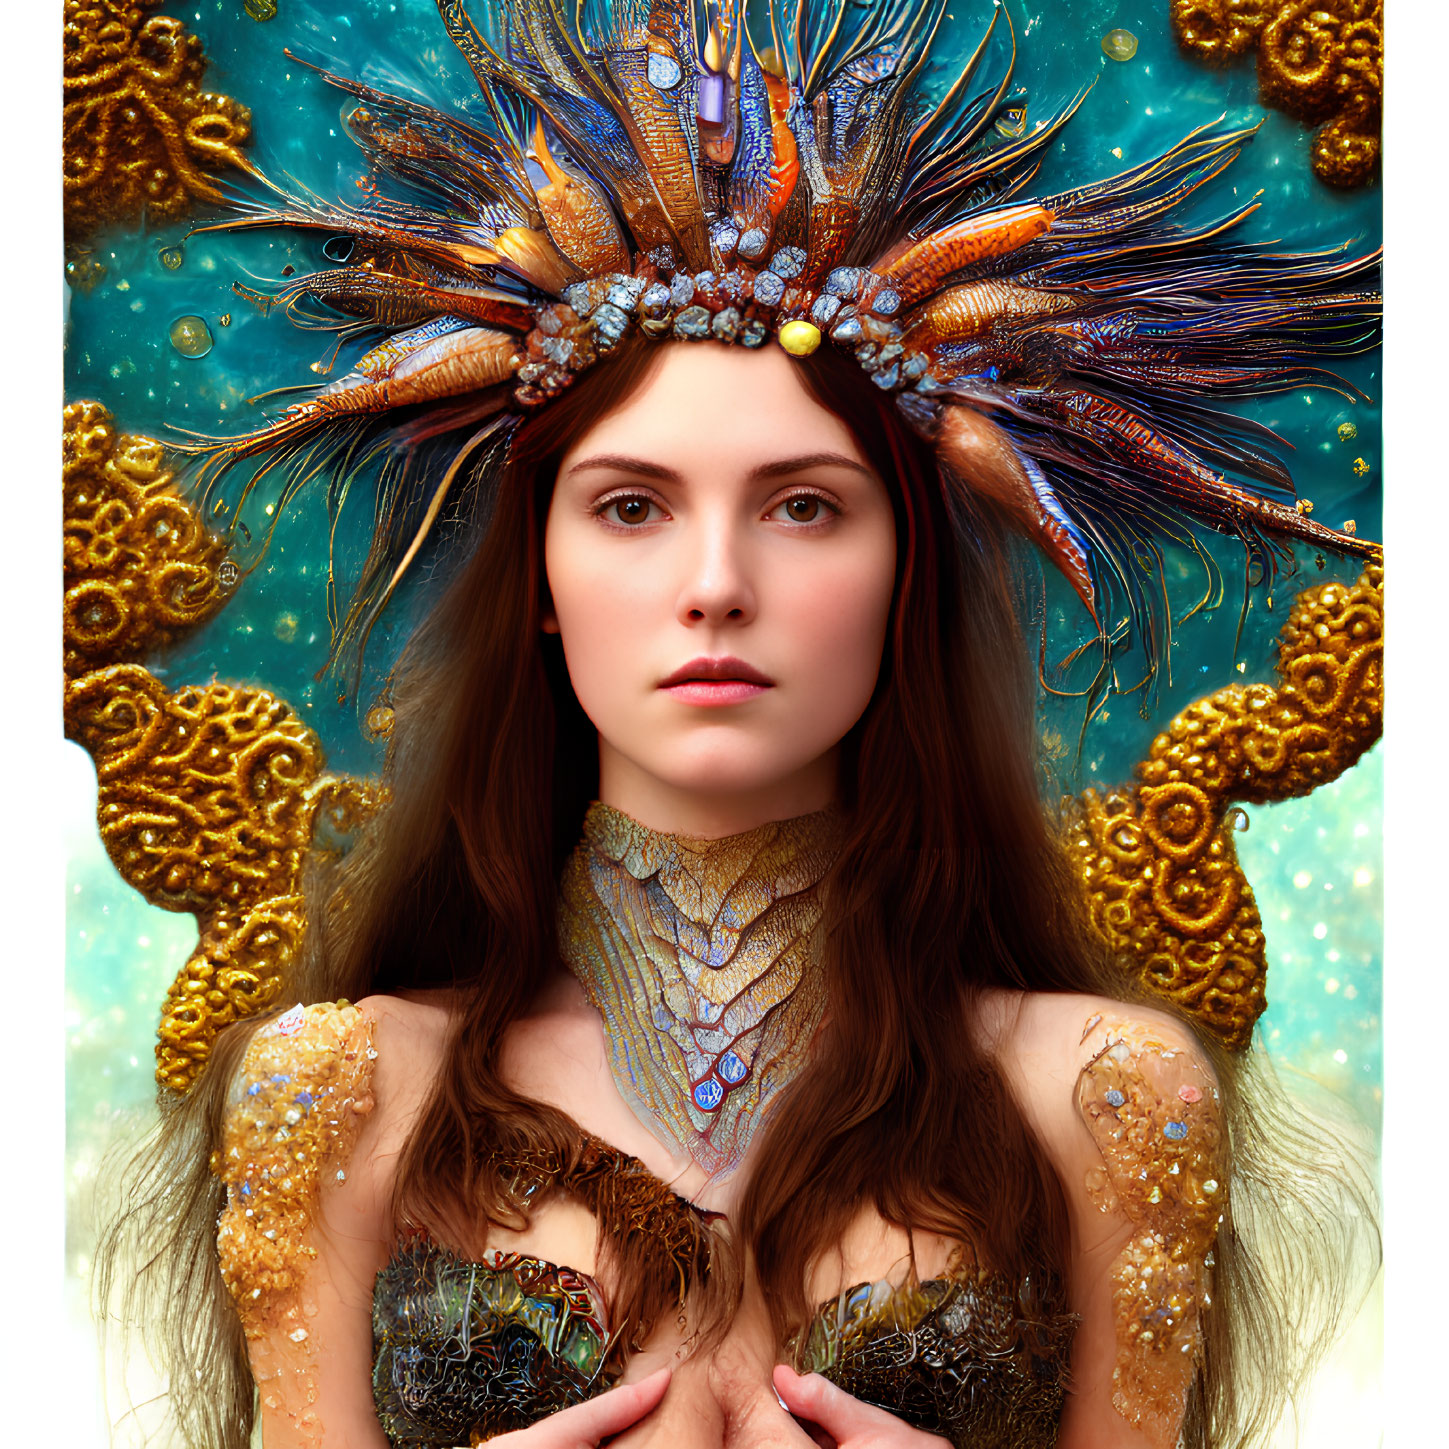 Woman with ornate peacock feather headdress in golden fractal patterns on teal background